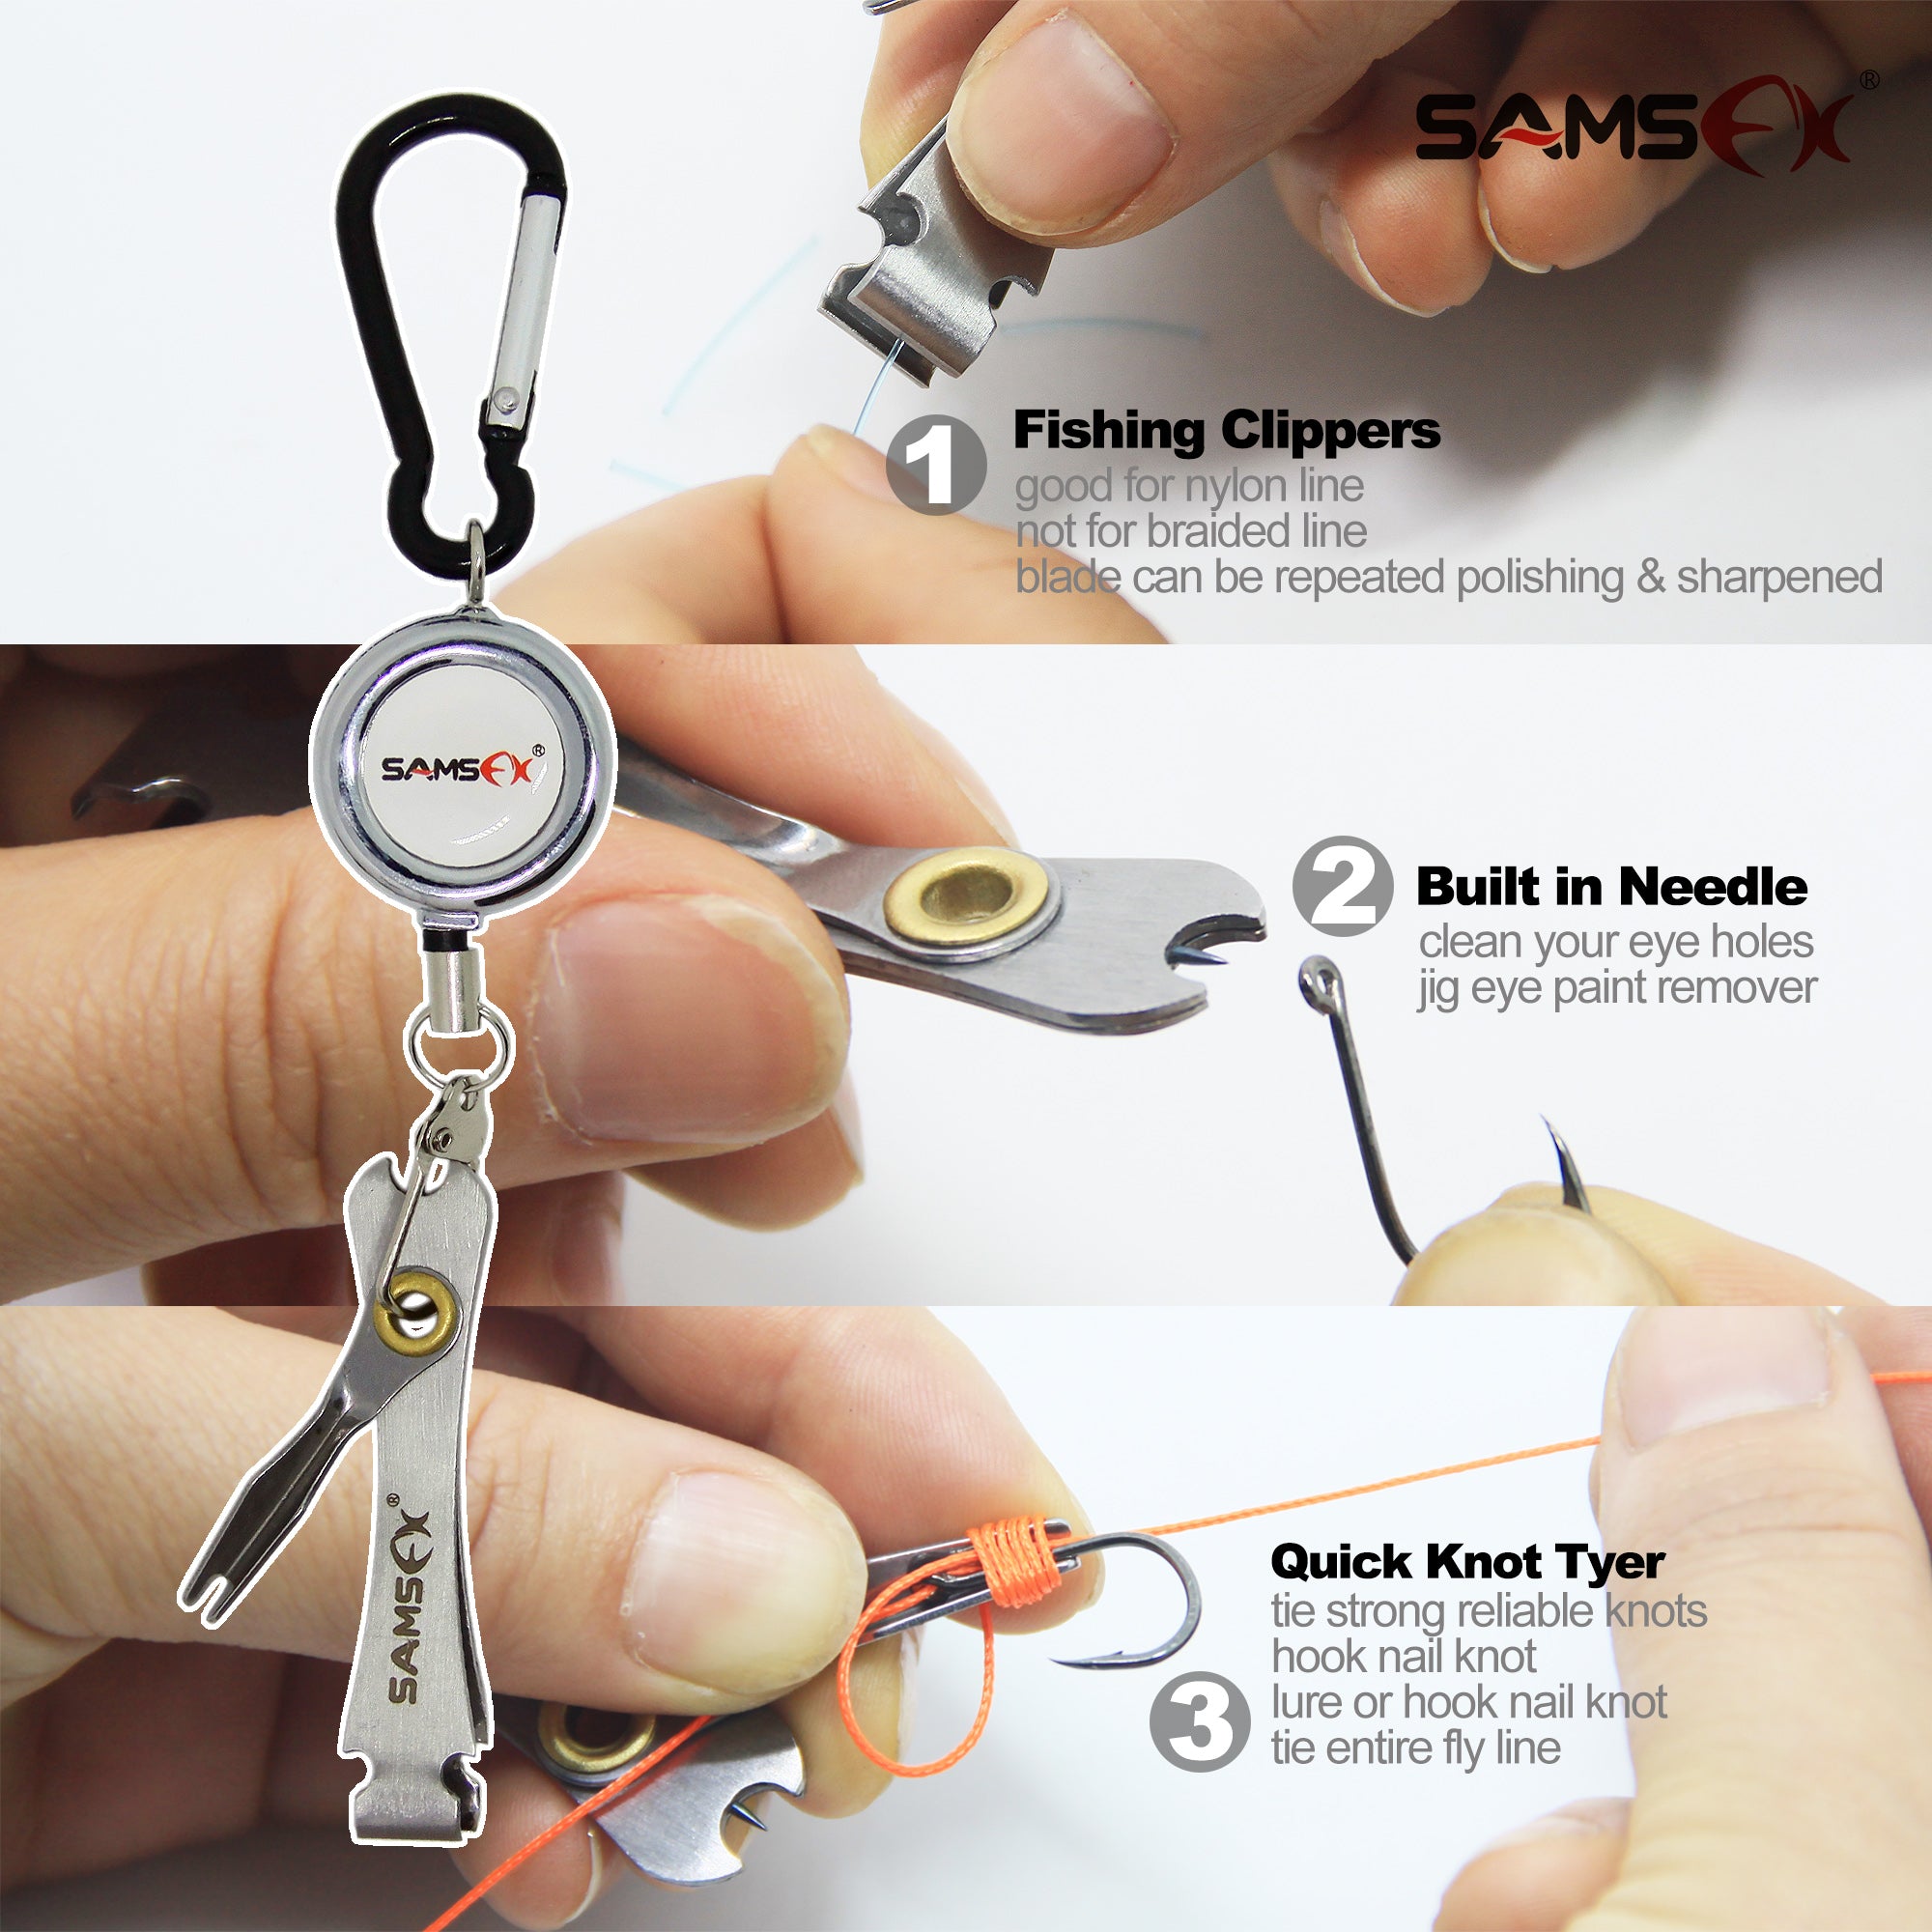 SAMSFX Fly Fishing Clippers with Zinger Retractor Nail Knot Tying